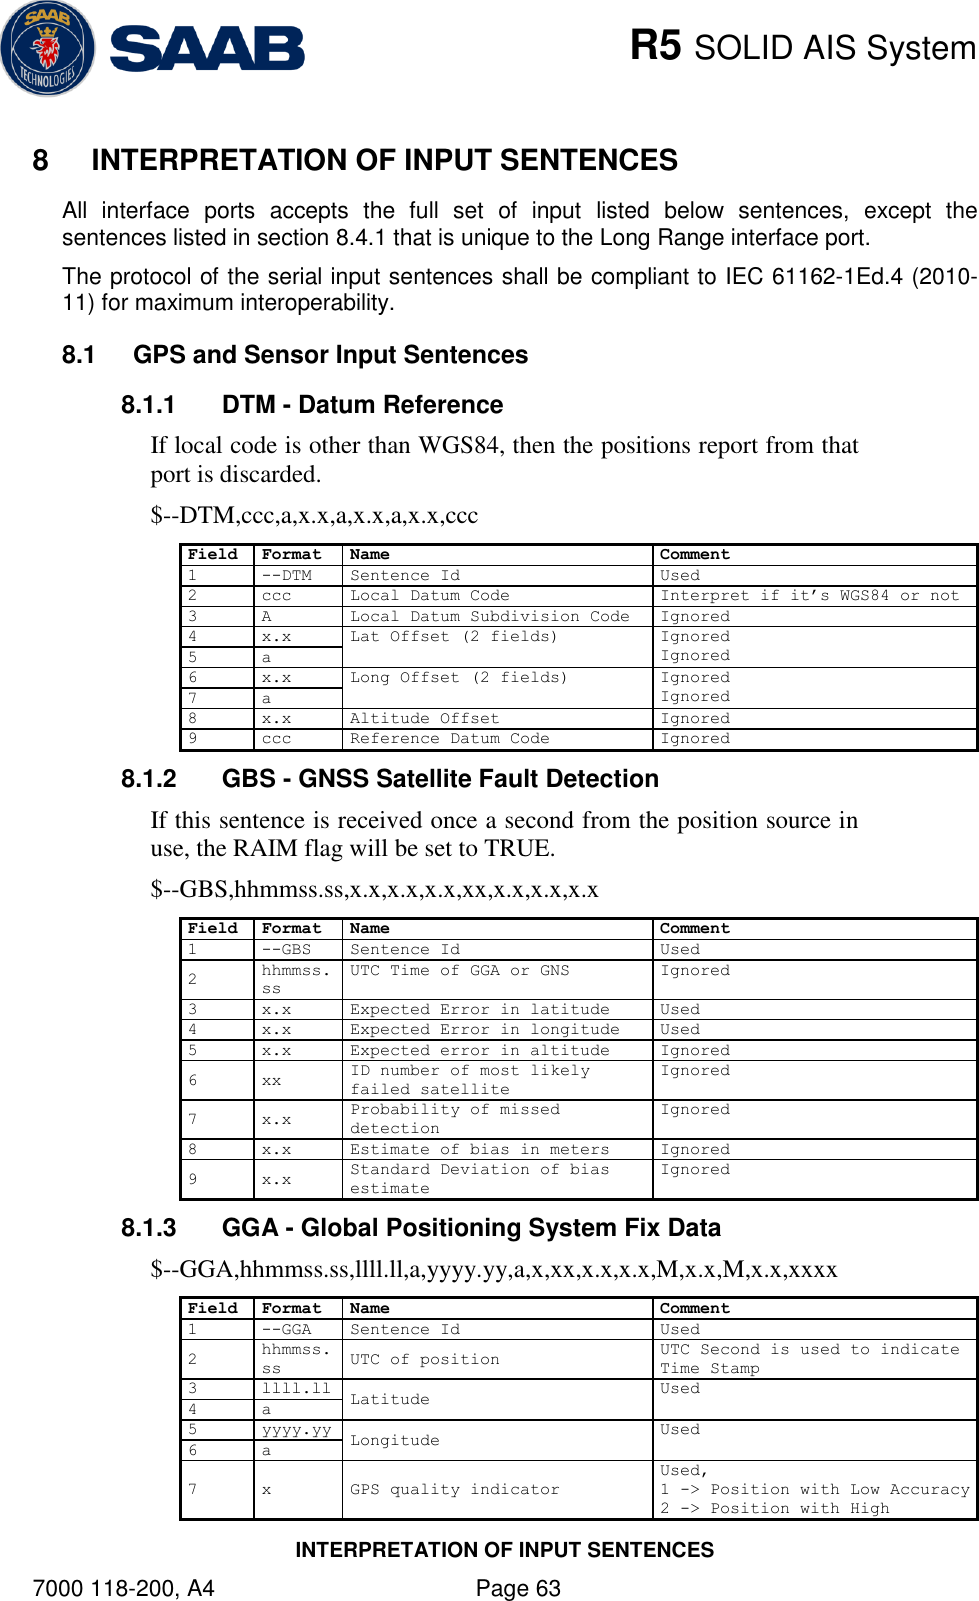    R5 SOLID AIS System INTERPRETATION OF INPUT SENTENCES 7000 118-200, A4    Page 63 8  INTERPRETATION OF INPUT SENTENCES All  interface  ports  accepts  the  full  set  of  input  listed  below  sentences,  except  the sentences listed in section 8.4.1 that is unique to the Long Range interface port.  The protocol of the serial input sentences shall be compliant to IEC 61162-1Ed.4 (2010-11) for maximum interoperability. 8.1  GPS and Sensor Input Sentences 8.1.1  DTM - Datum Reference If local code is other than WGS84, then the positions report from that port is discarded. $--DTM,ccc,a,x.x,a,x.x,a,x.x,ccc Field Format Name Comment 1 --DTM Sentence Id Used 2 ccc Local Datum Code Interpret if it‟s WGS84 or not 3 A Local Datum Subdivision Code Ignored 4 x.x Lat Offset (2 fields) Ignored Ignored 5 a 6 x.x Long Offset (2 fields) Ignored Ignored 7 a 8 x.x Altitude Offset Ignored 9 ccc Reference Datum Code Ignored 8.1.2  GBS - GNSS Satellite Fault Detection If this sentence is received once a second from the position source in use, the RAIM flag will be set to TRUE. $--GBS,hhmmss.ss,x.x,x.x,x.x,xx,x.x,x.x,x.x Field Format Name Comment 1 --GBS Sentence Id Used 2 hhmmss.ss UTC Time of GGA or GNS Ignored 3 x.x Expected Error in latitude Used 4 x.x Expected Error in longitude Used 5 x.x Expected error in altitude Ignored 6 xx ID number of most likely failed satellite Ignored 7 x.x Probability of missed detection Ignored 8 x.x Estimate of bias in meters Ignored 9 x.x Standard Deviation of bias estimate Ignored 8.1.3  GGA - Global Positioning System Fix Data $--GGA,hhmmss.ss,llll.ll,a,yyyy.yy,a,x,xx,x.x,x.x,M,x.x,M,x.x,xxxx Field Format Name Comment 1 --GGA Sentence Id Used 2 hhmmss.ss UTC of position UTC Second is used to indicate Time Stamp 3 llll.ll Latitude Used  4 a 5 yyyy.yy Longitude Used 6 a 7 x GPS quality indicator Used, 1 -&gt; Position with Low Accuracy 2 -&gt; Position with High 